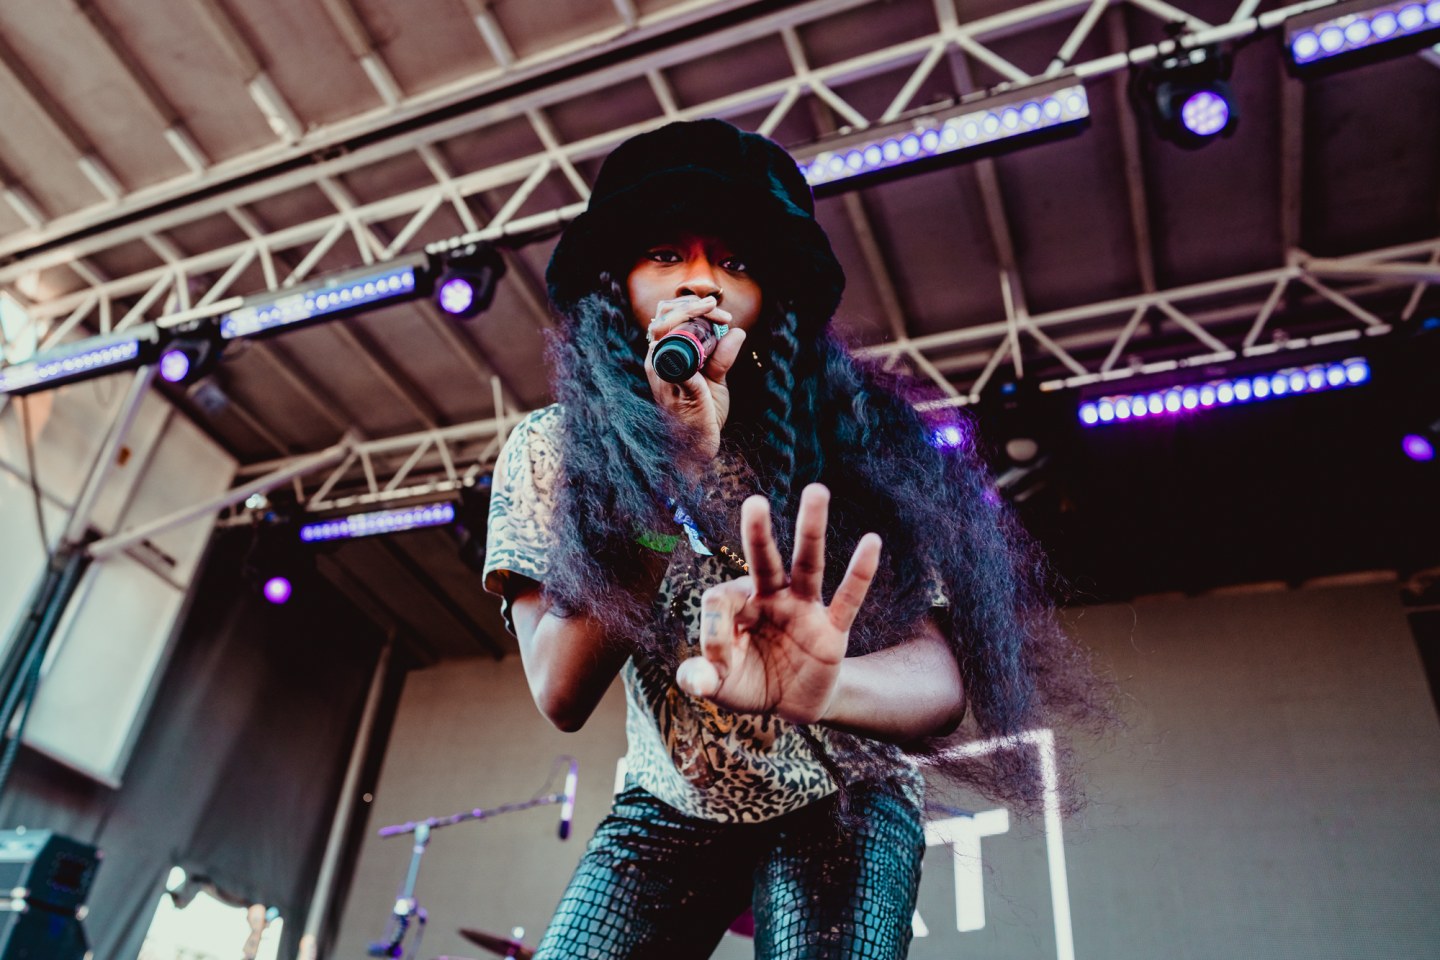 35 brilliant photos from Day 1 of FADER FORT